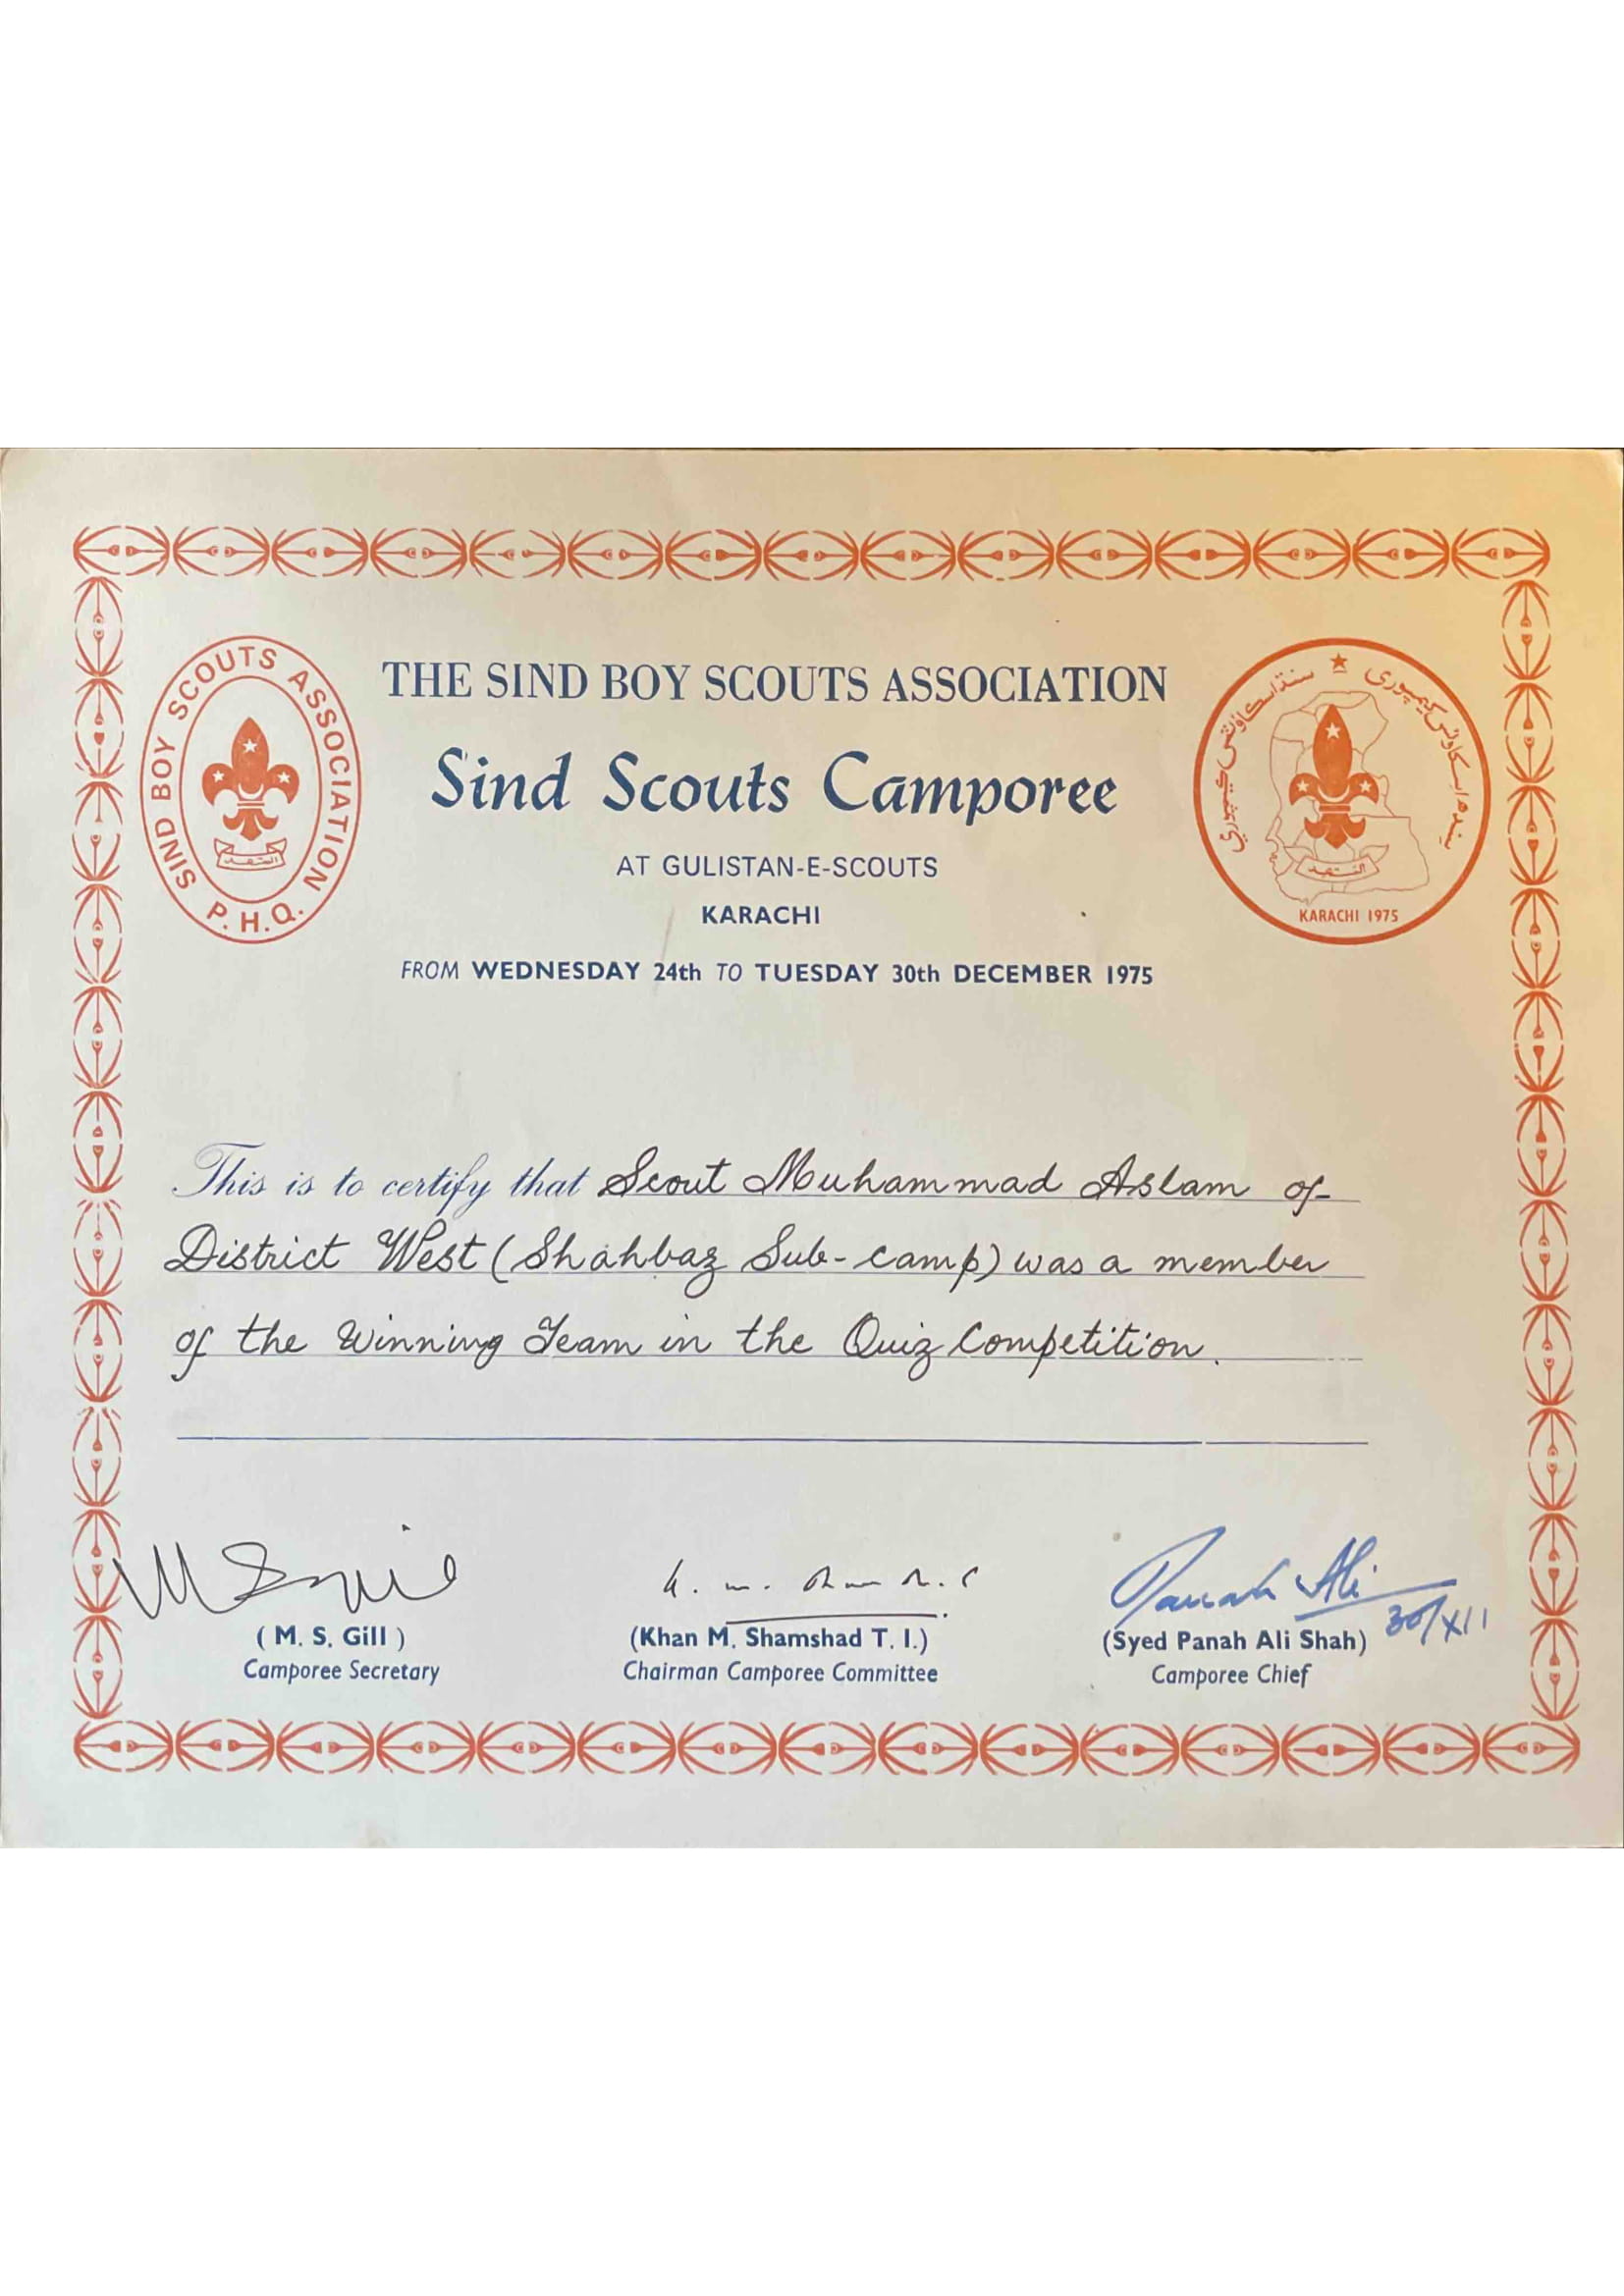 1975 Sind Scouts Camporee Quiz Competition Award